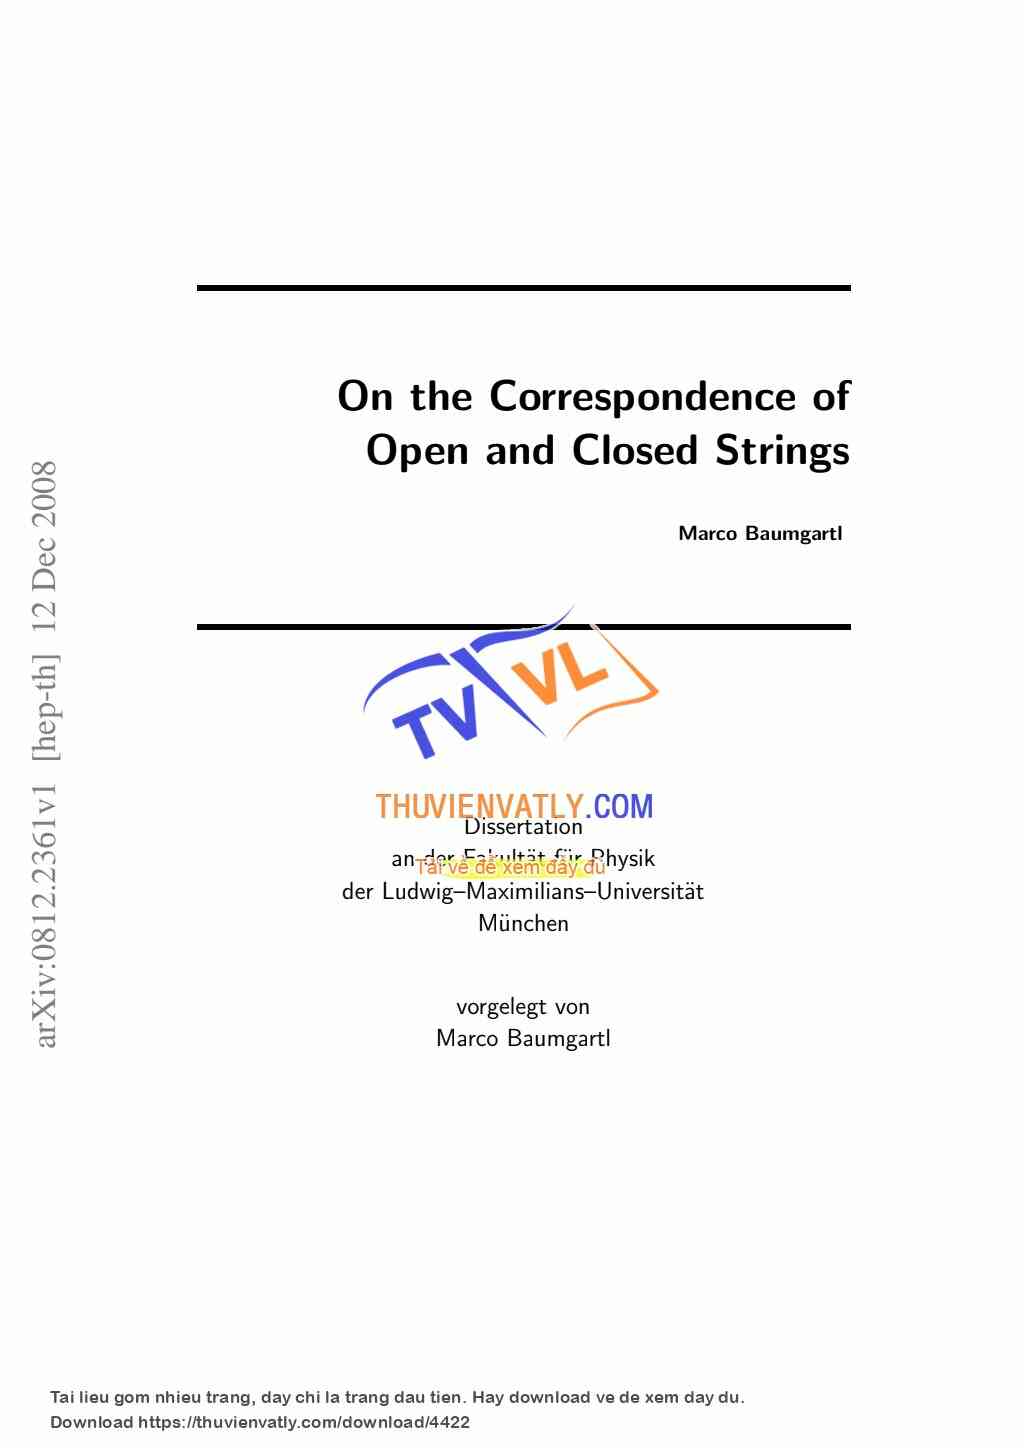 On the Correspondence of Open and Closed Strings